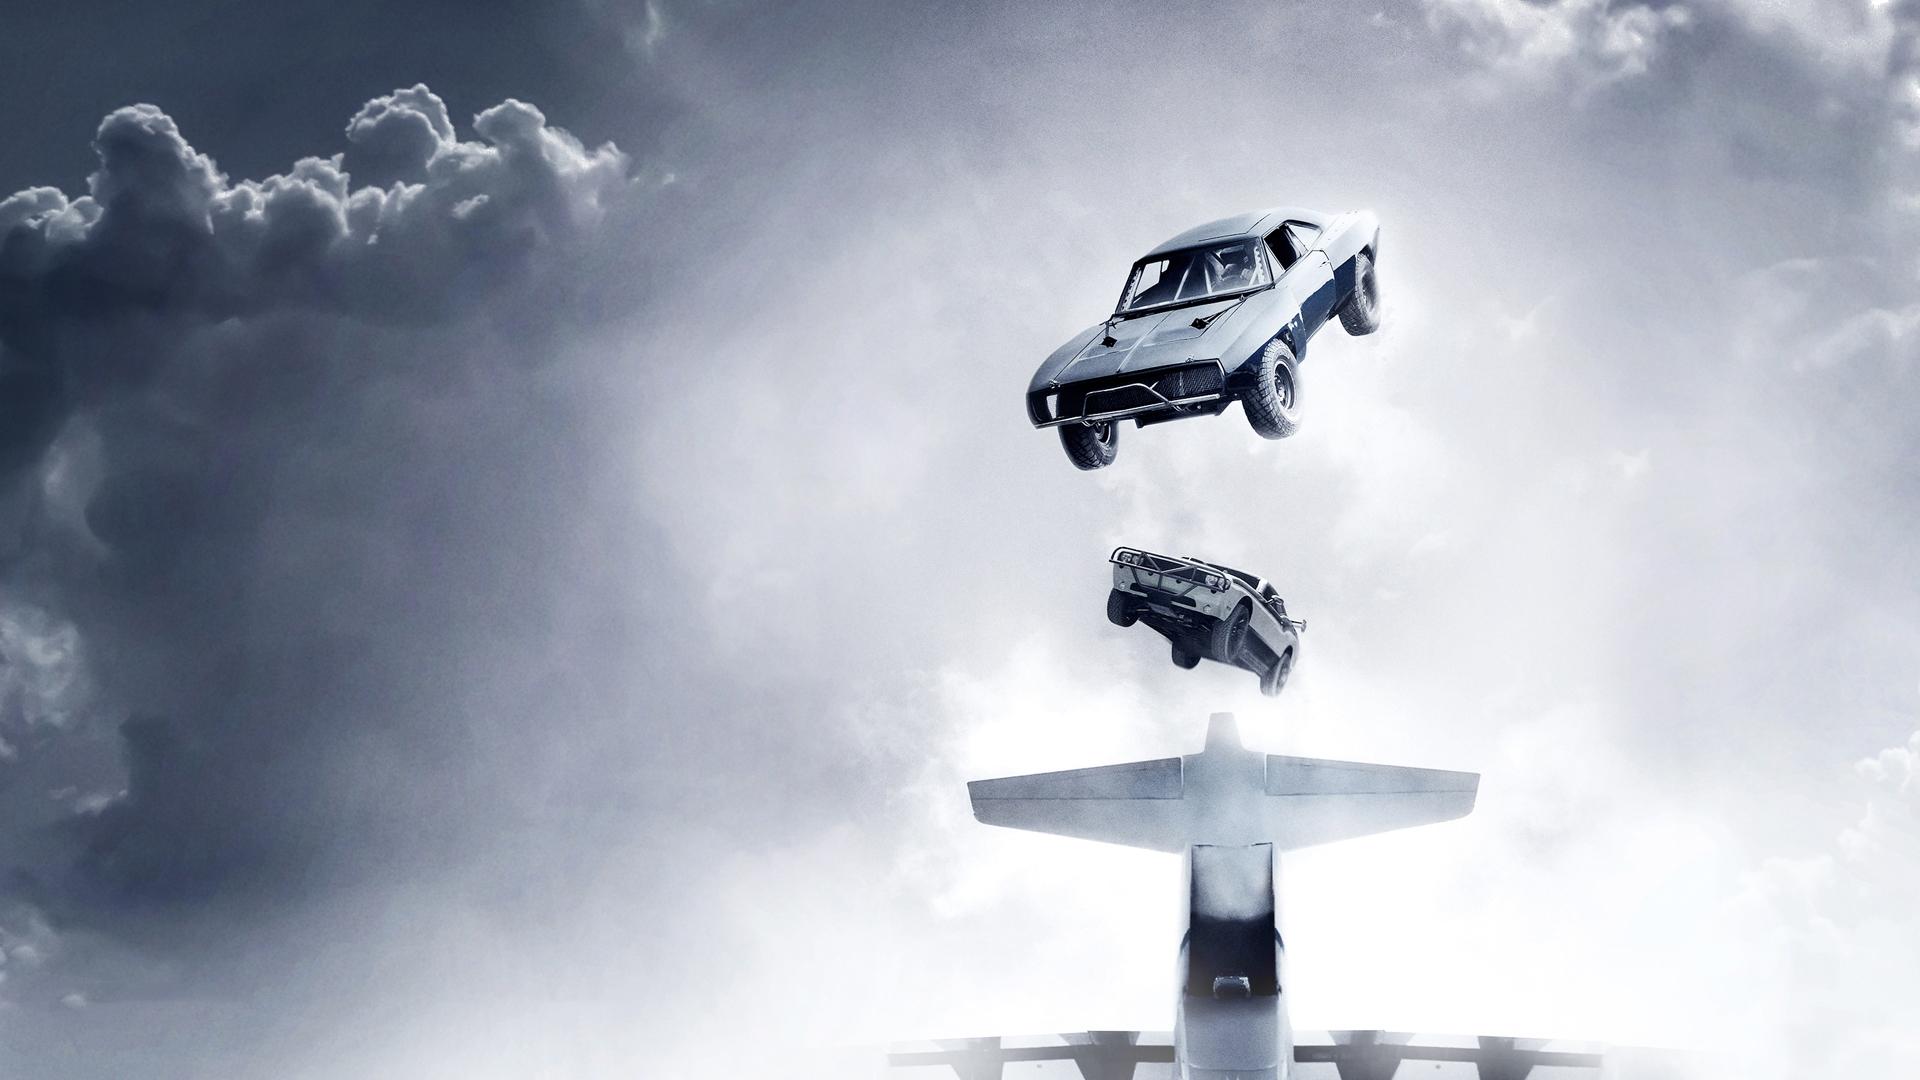 Wallpaper Furious 7. Furious 7 Wallpaper, Furious Wallpaper and Furious 7 Desktop Background